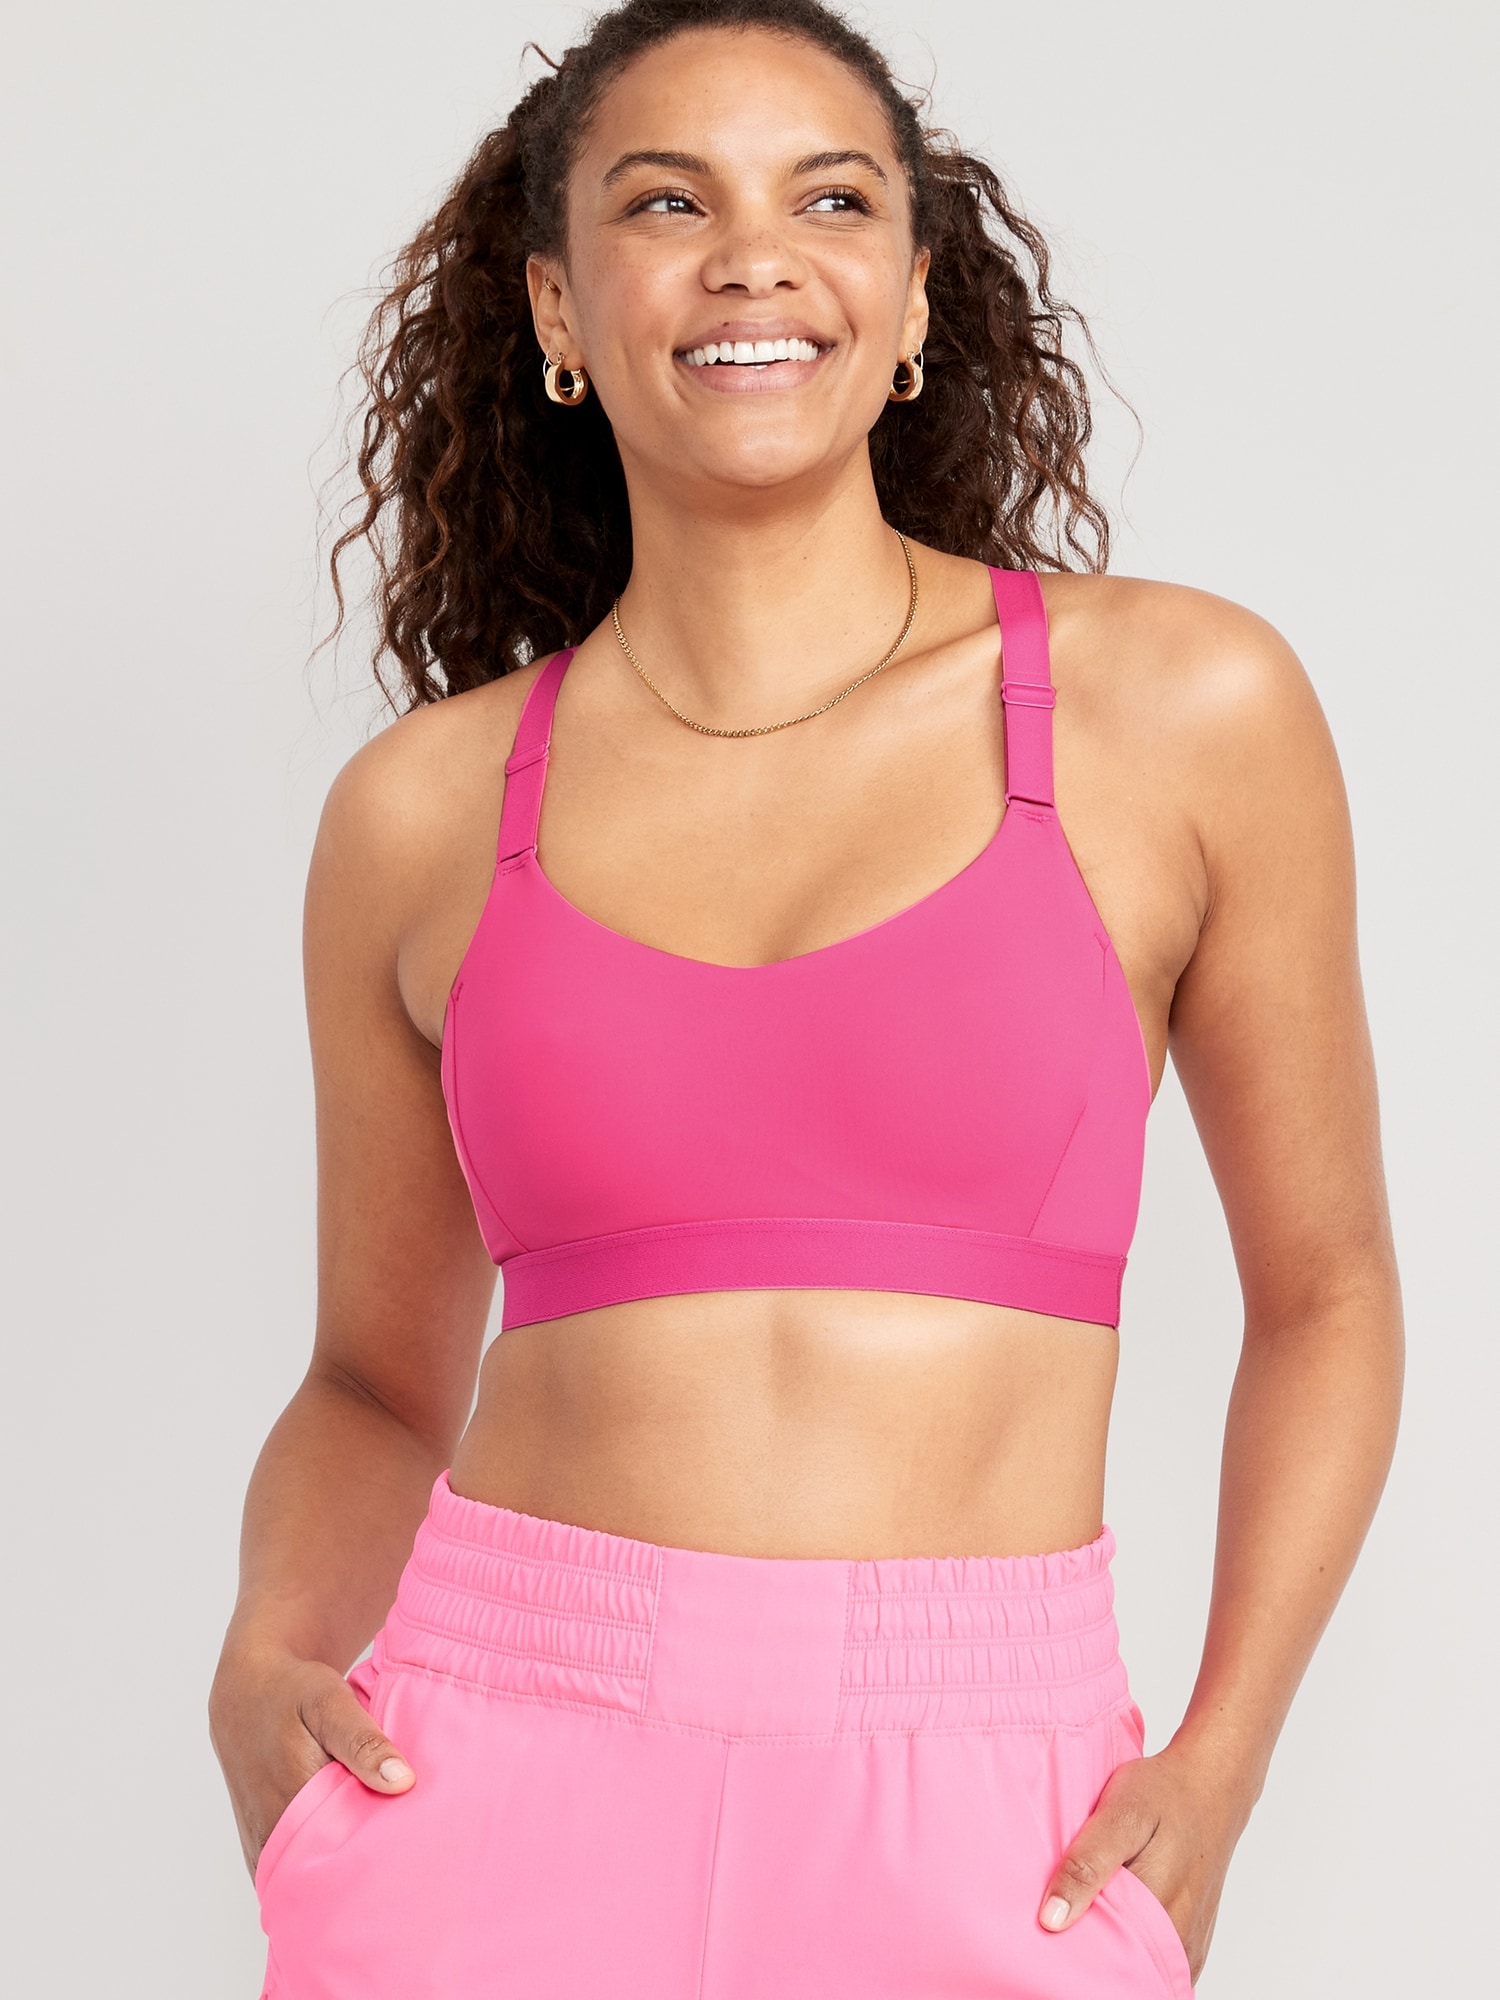 Under Armour Compression Sports Bra Pink Size XS - $7 - From Ivy